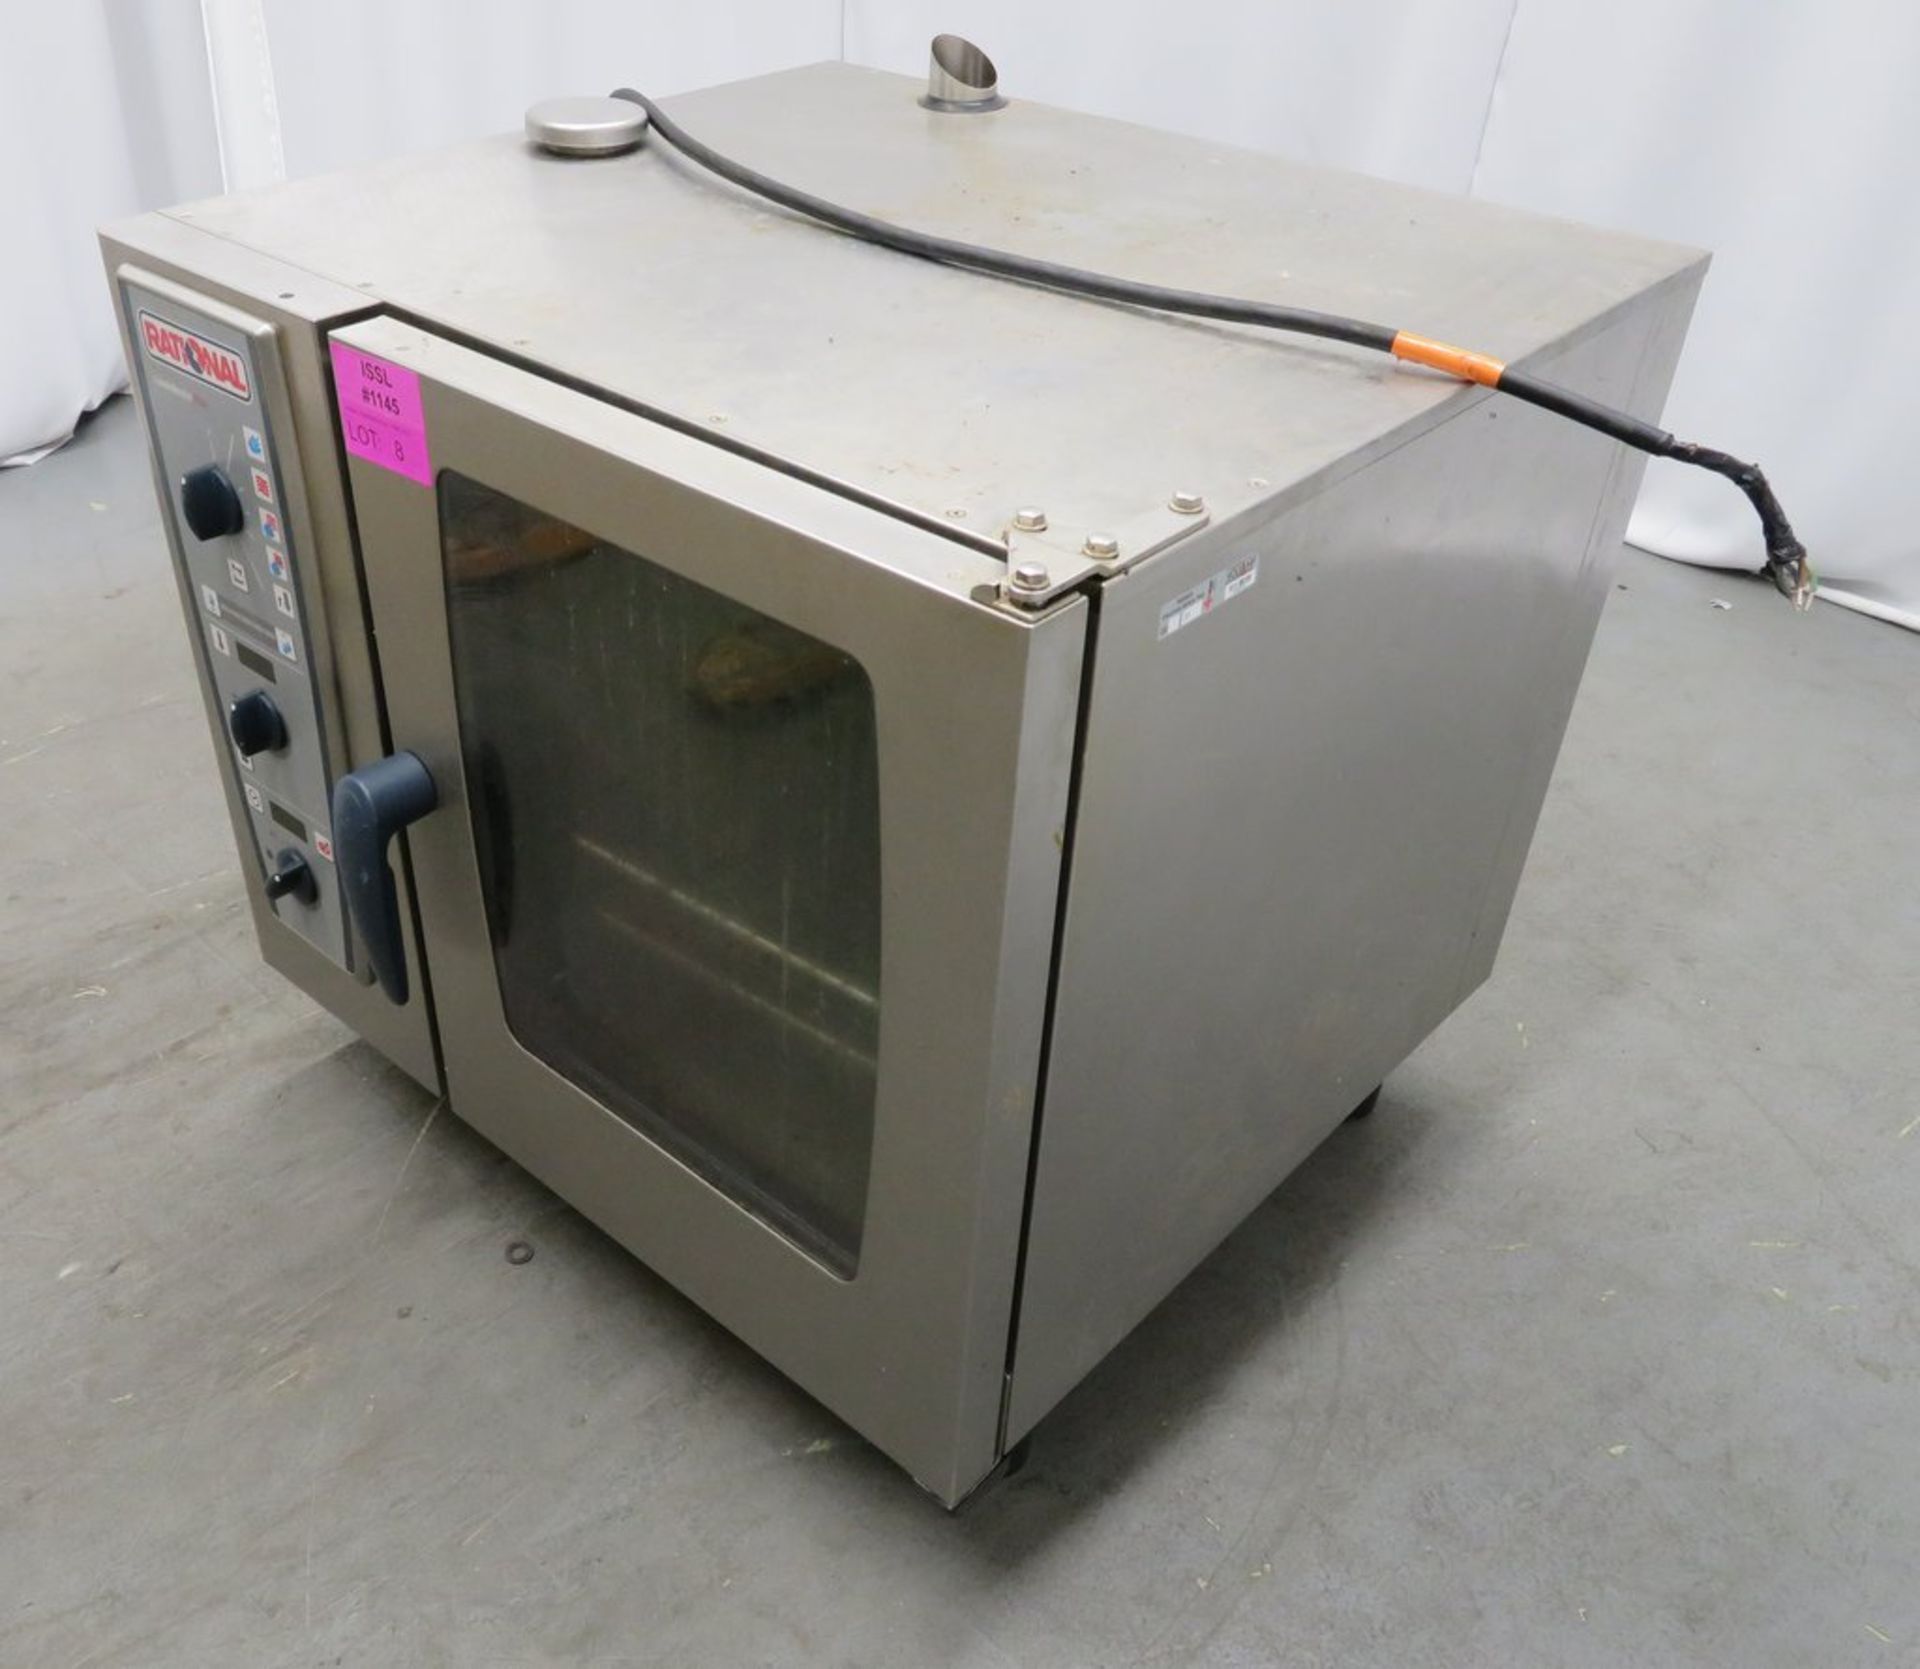 Rational CMP 61 Combi Master Plus 6 grid combi oven, 3 phase electric - Image 3 of 12